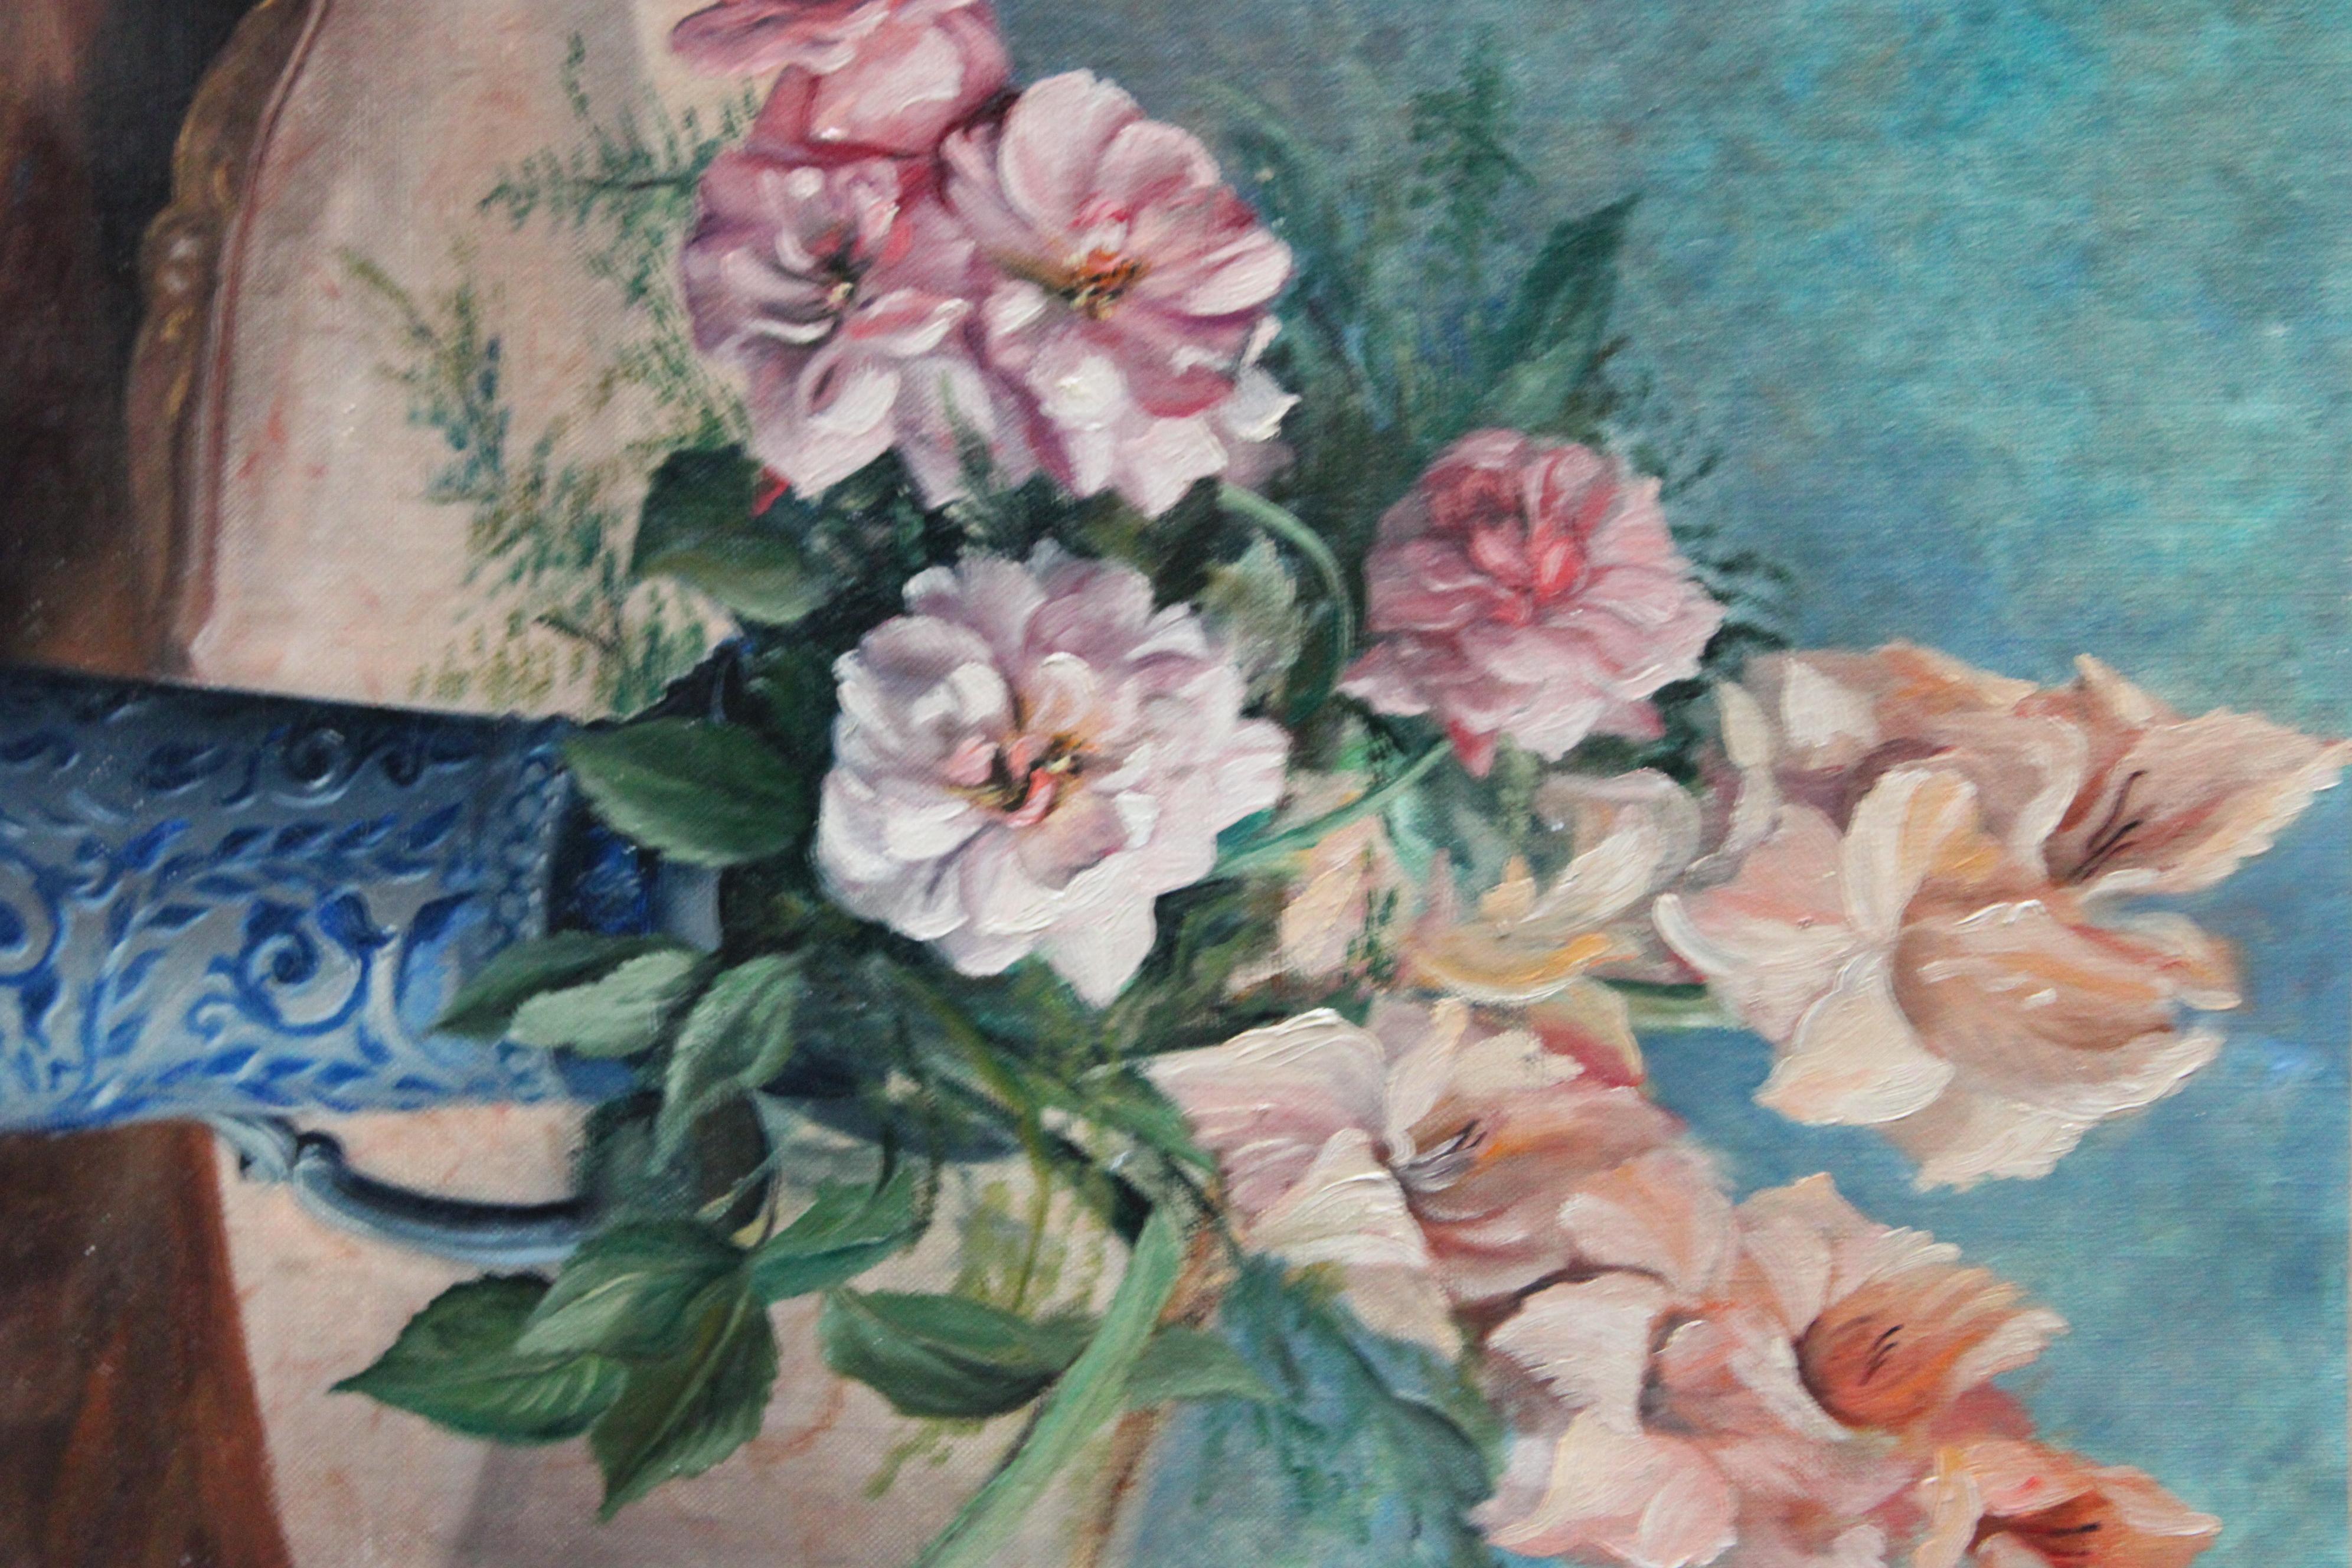 Vintage still life oil painting, floral interior painting, pink flower bouquet - French School Painting by Unknown